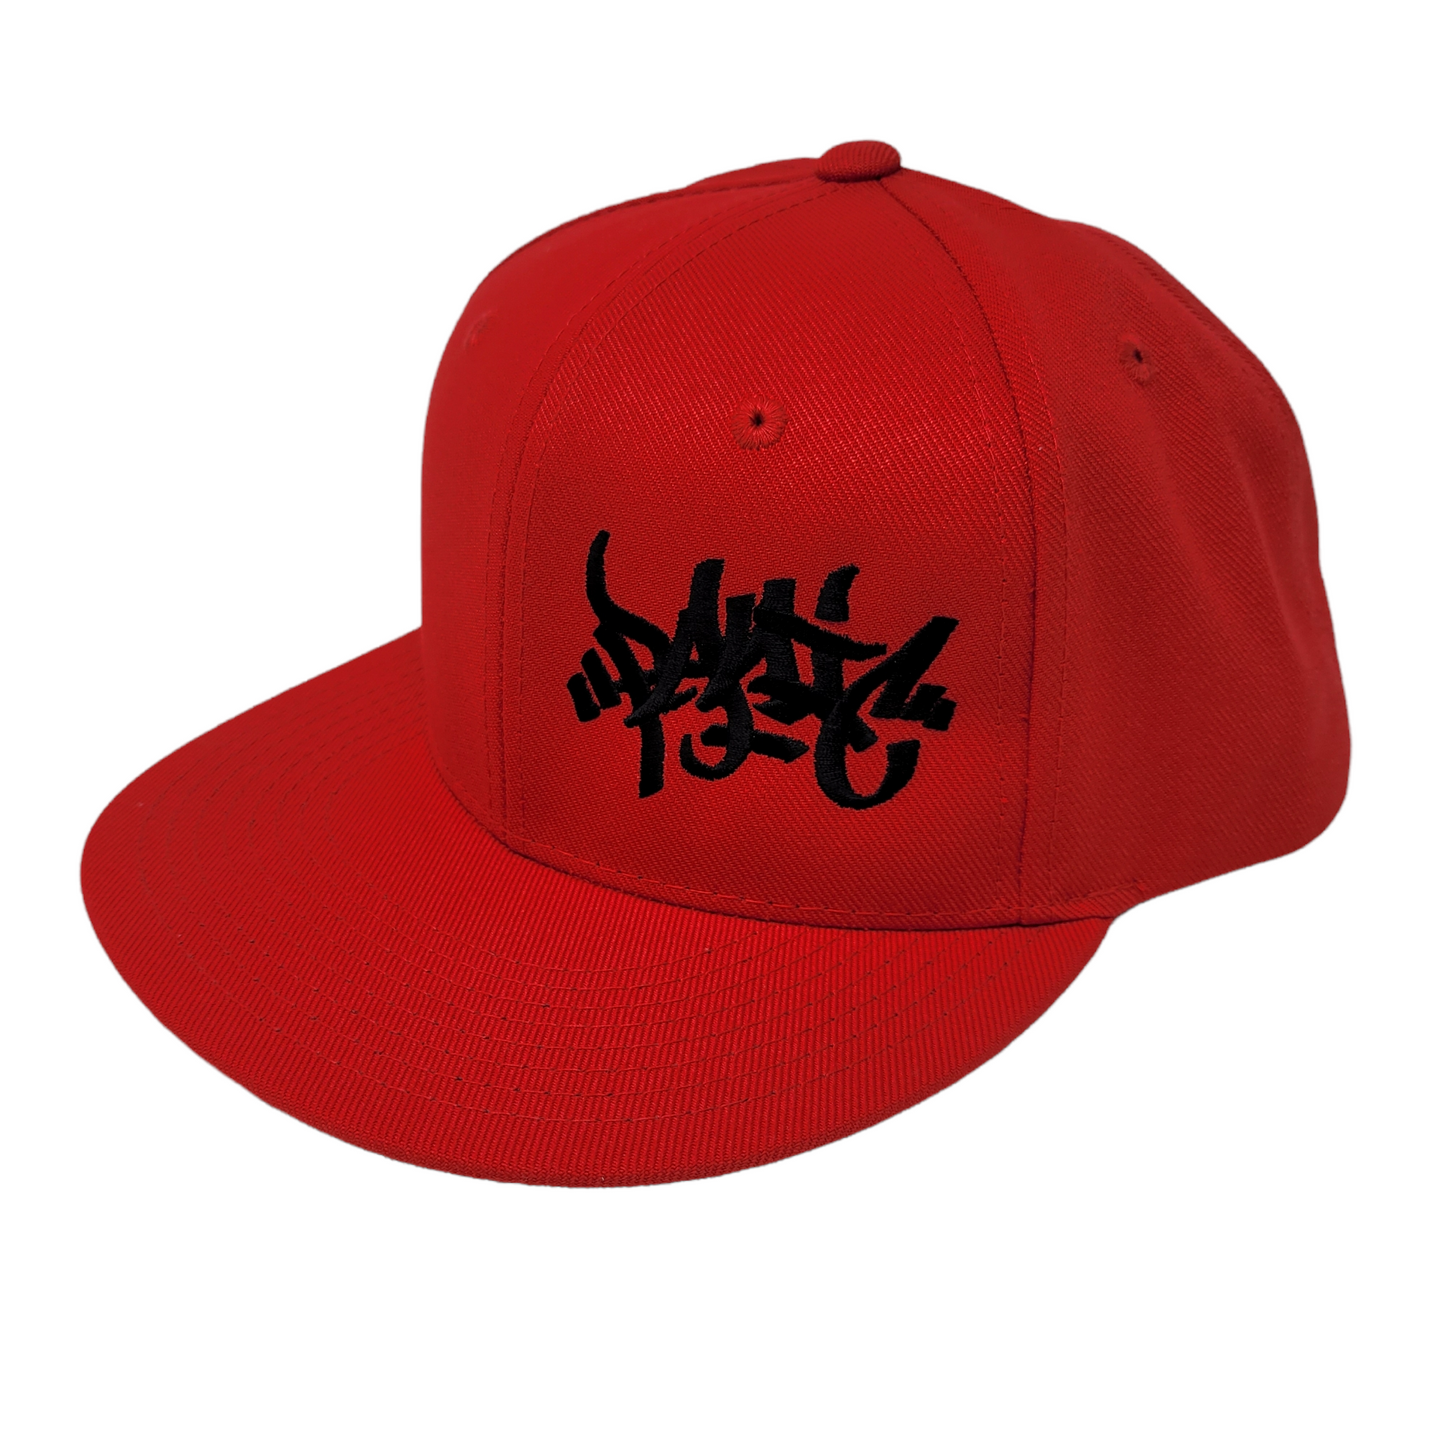 THE RED TAG LOGO SNAPBACK HAT